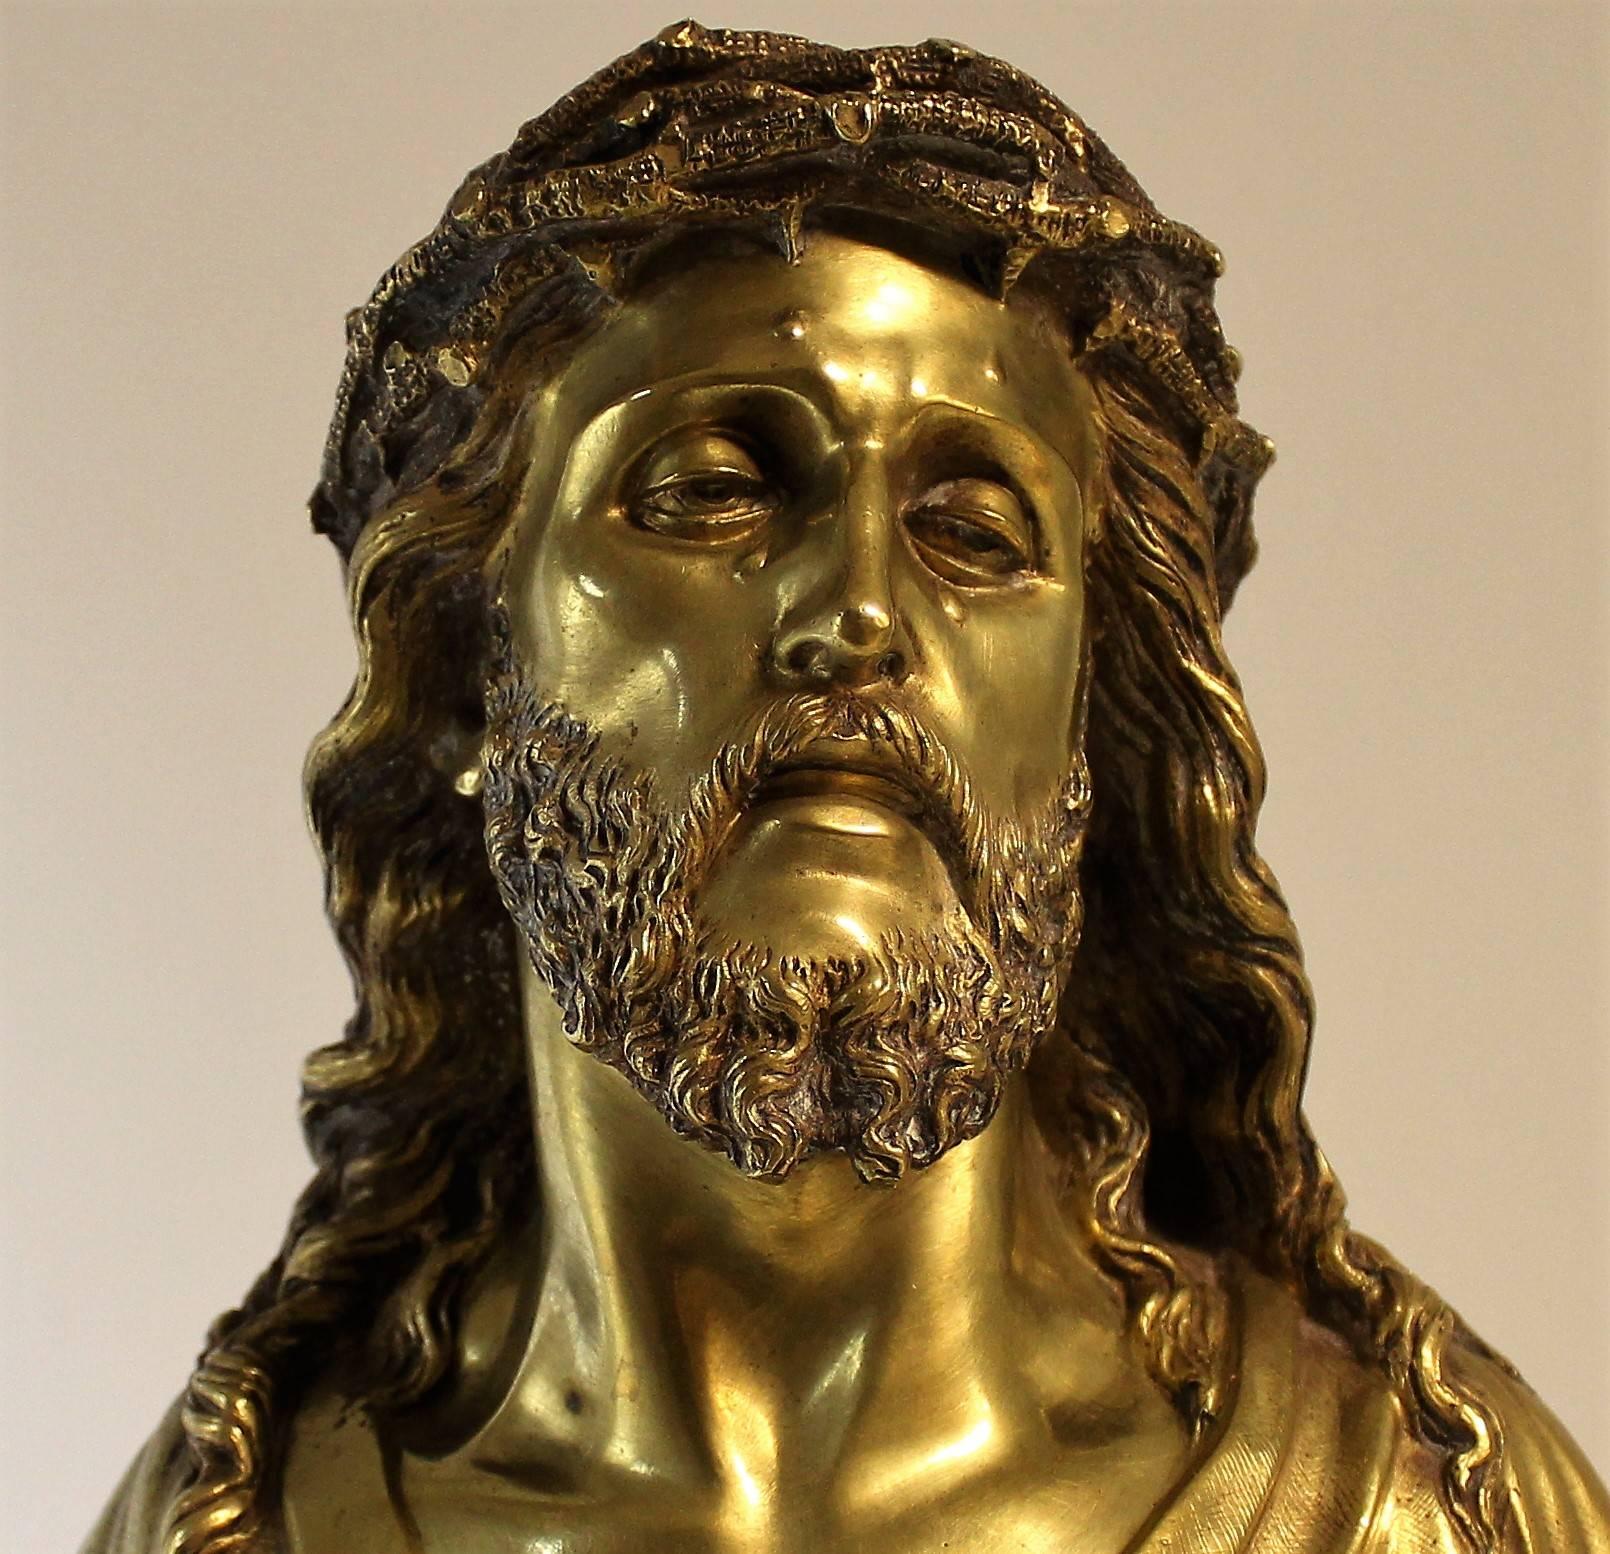 Patinated gilt bronze bust of Jesus Christ by French sculptor Jean Bulio (1827-1911) and stamped with the societé des bronzes de Paris foundry seal.